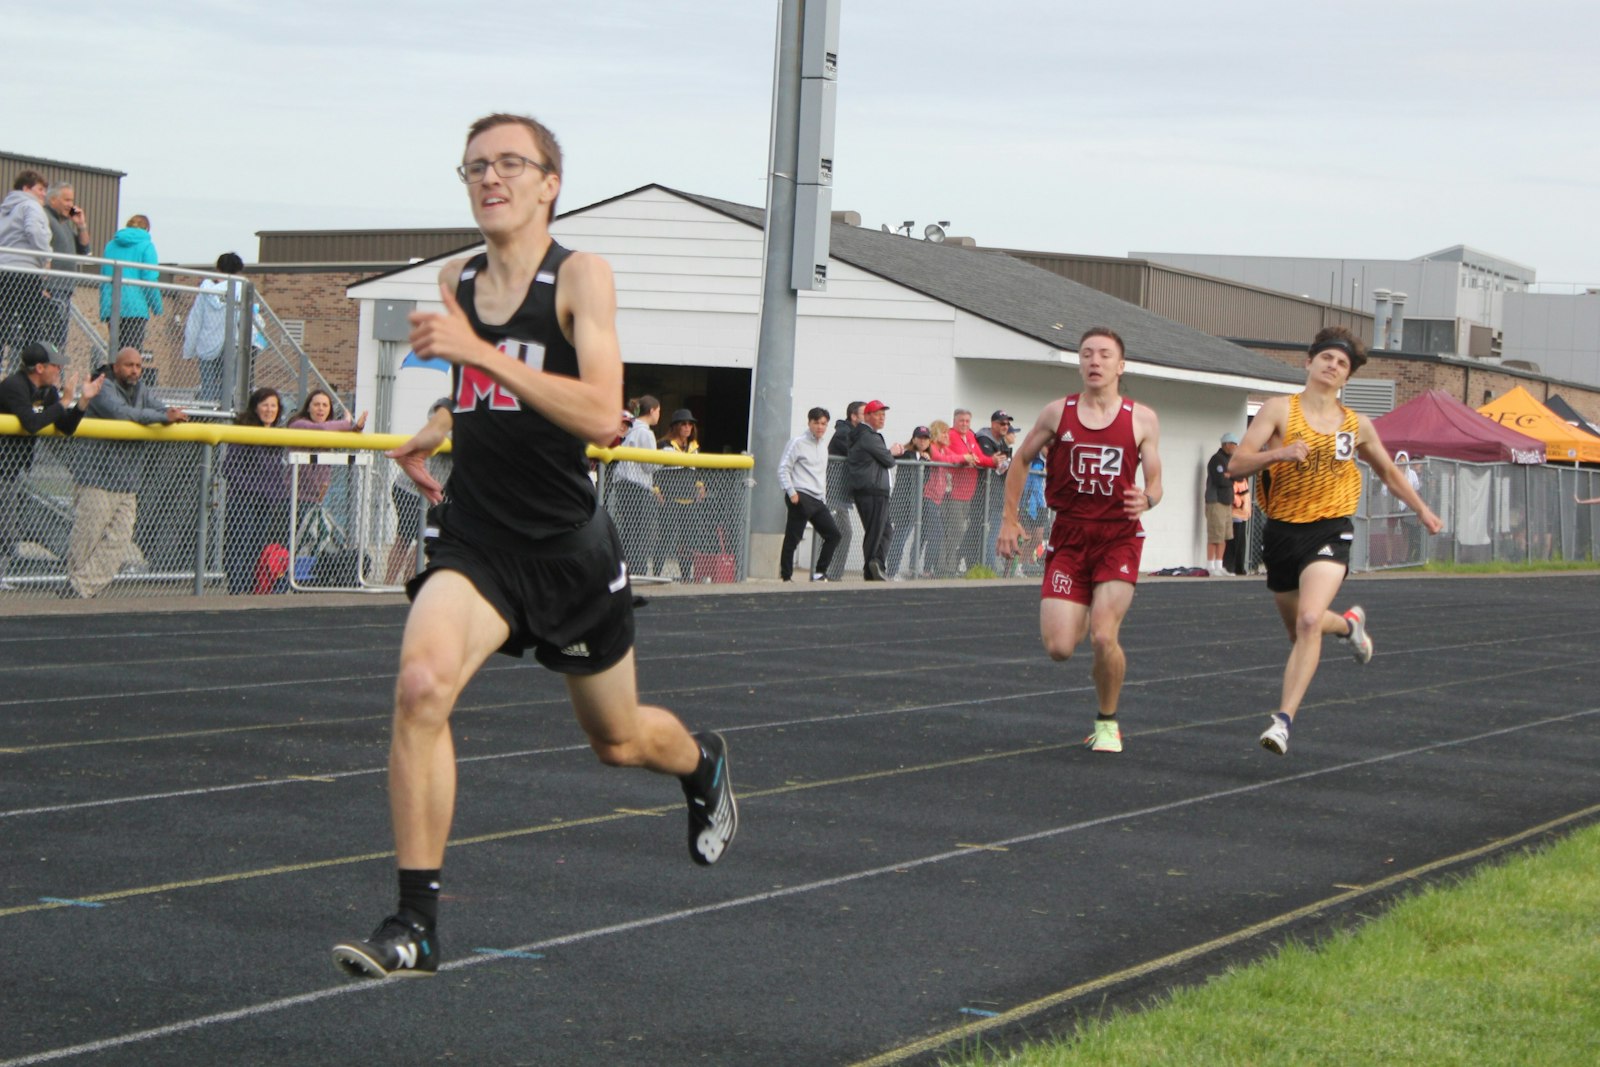 Marine City Cardinal Mooney sophomore Tyler Lenn holds off a late charge from Riverview Gabriel Richard’s Alex Meszaros and Bishop Foley’s Max Mader to win the 800-meter run. Earlier, Lenn won the 1600 meters.